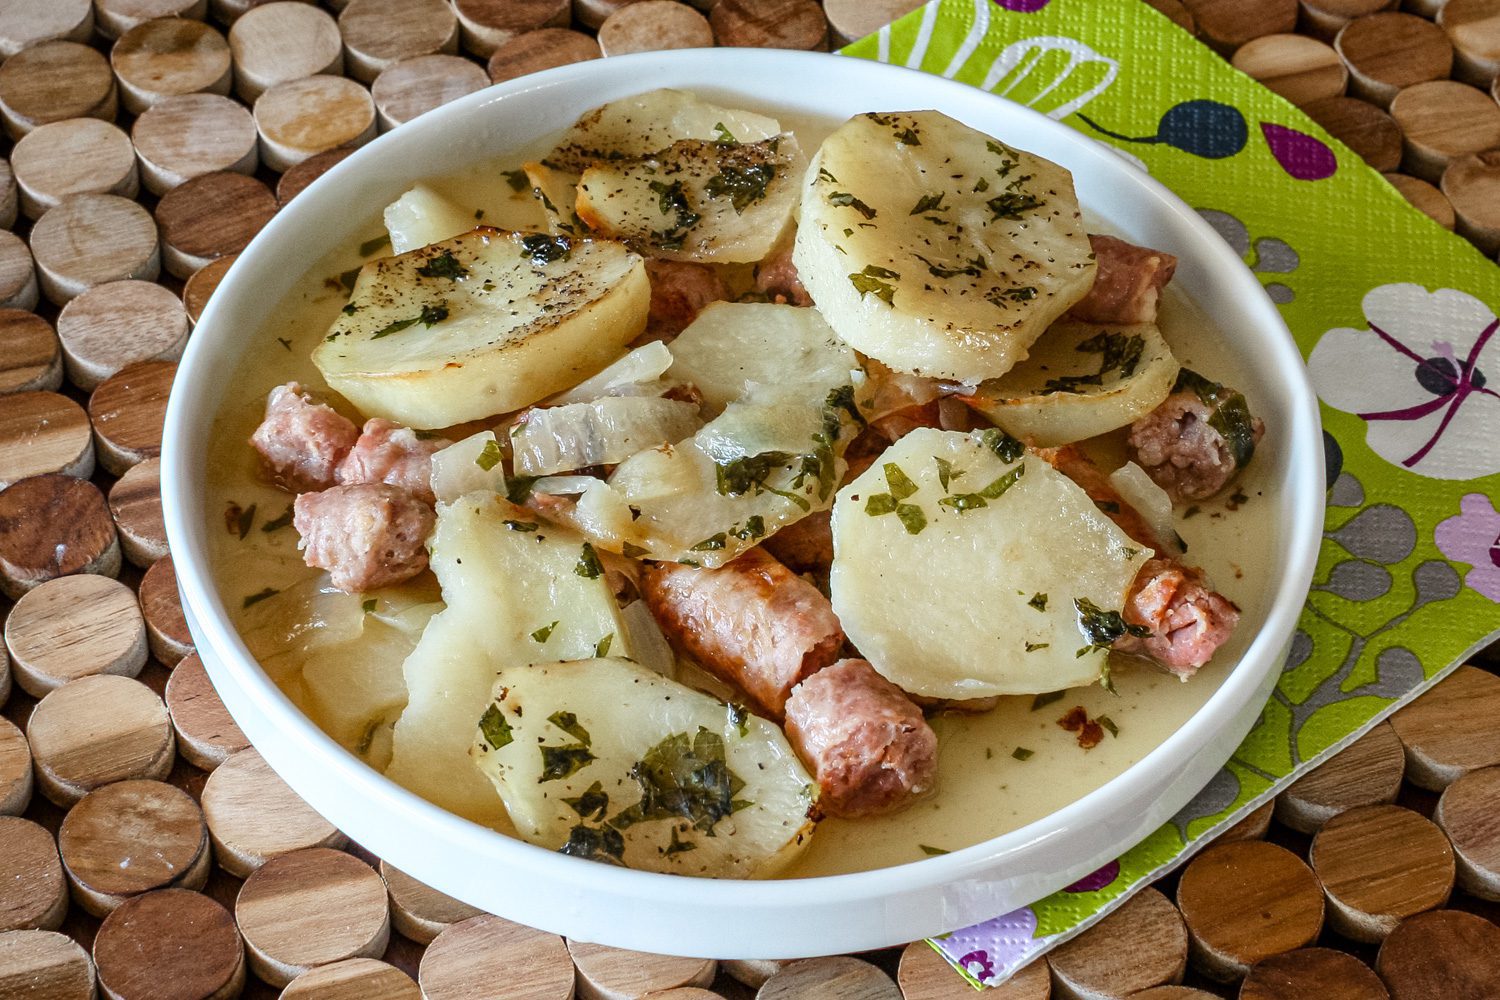 A plate of dublin coddle, potatoes and sausages